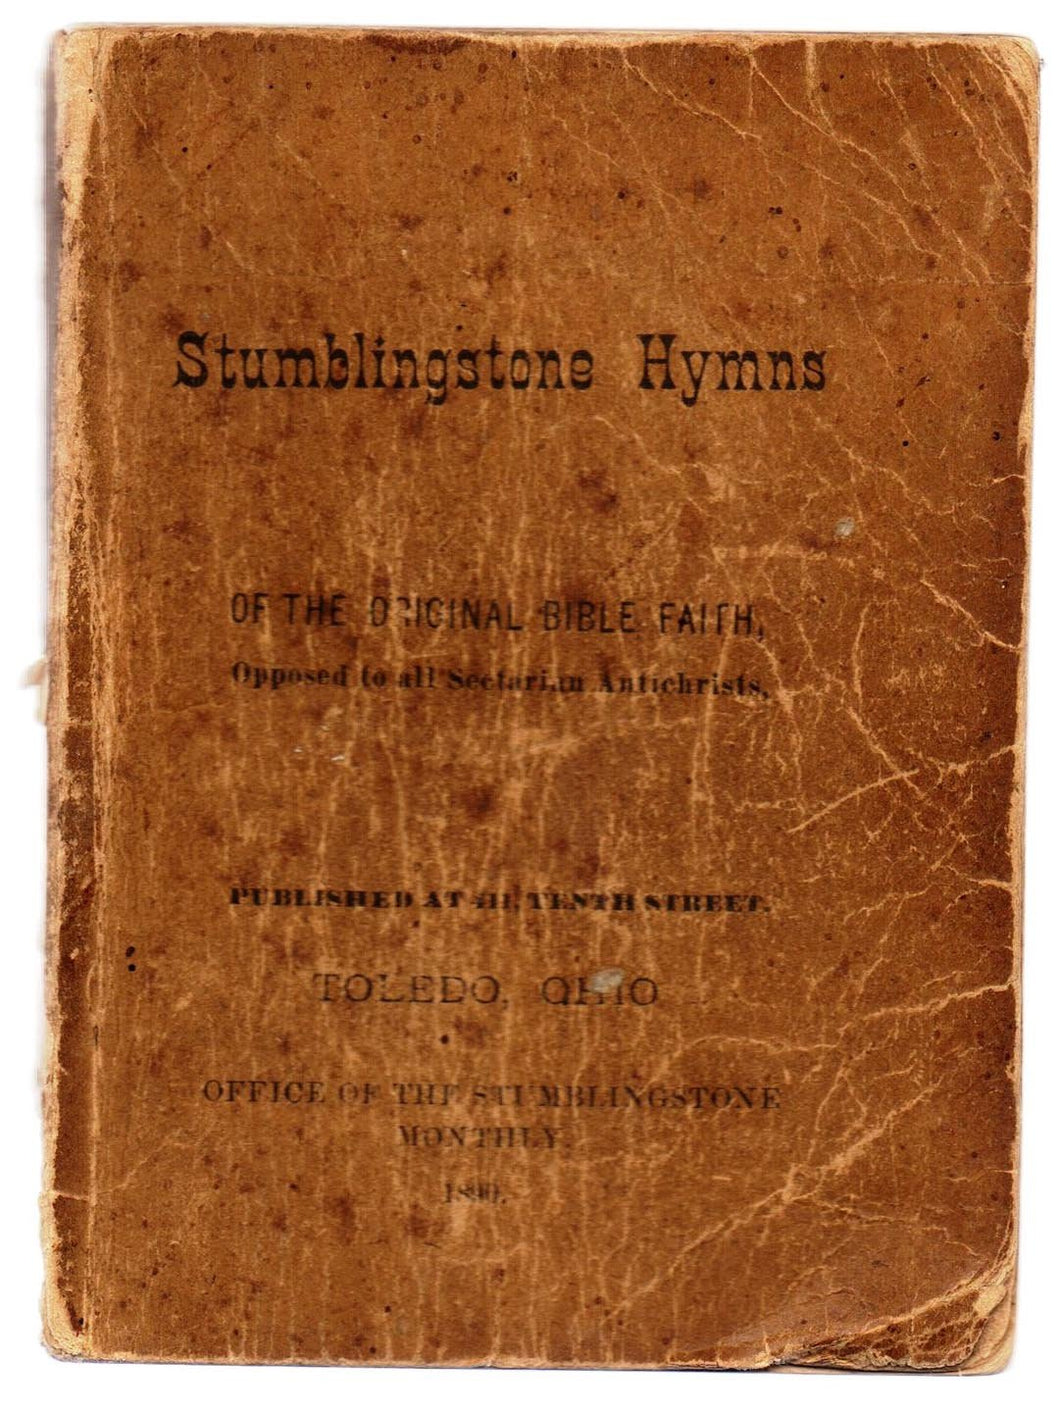 Stumblingstone Hymns of the Original Bible Faith, Opposed to all Sectarian Antichrists